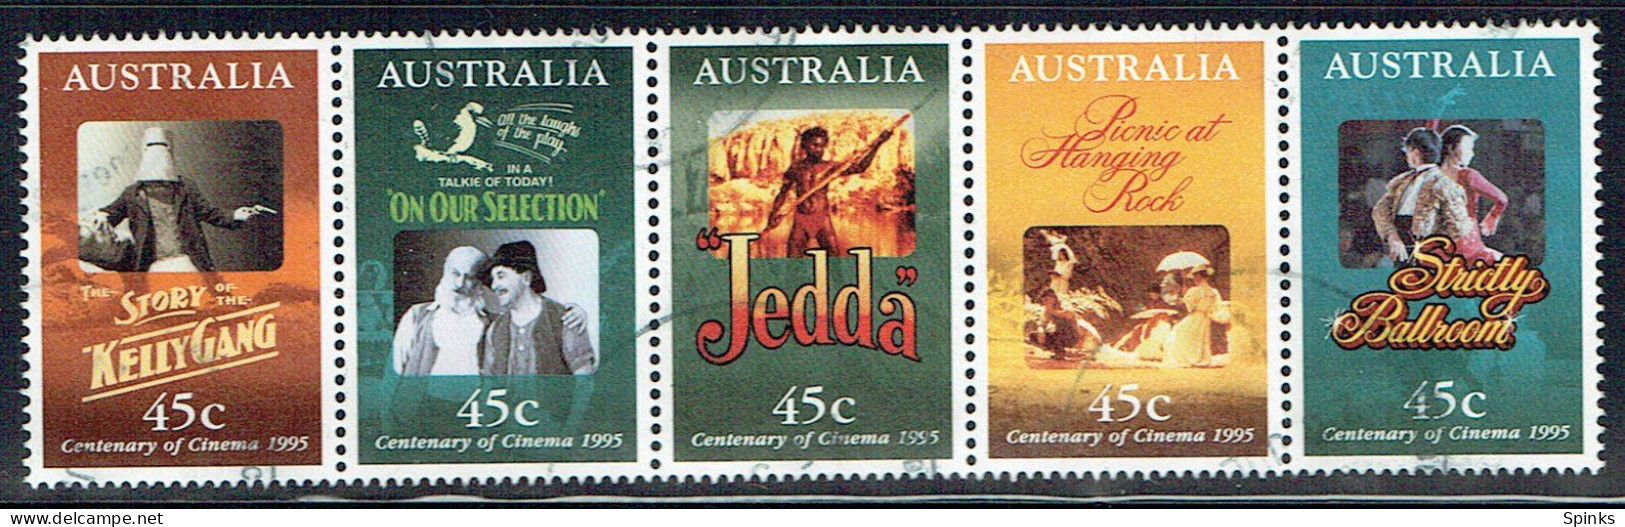 AUSTRALIA - 1995 Centenary Of Cinema Strip Of 5 Stamps VST/ASC# 1398 Used - Used Stamps